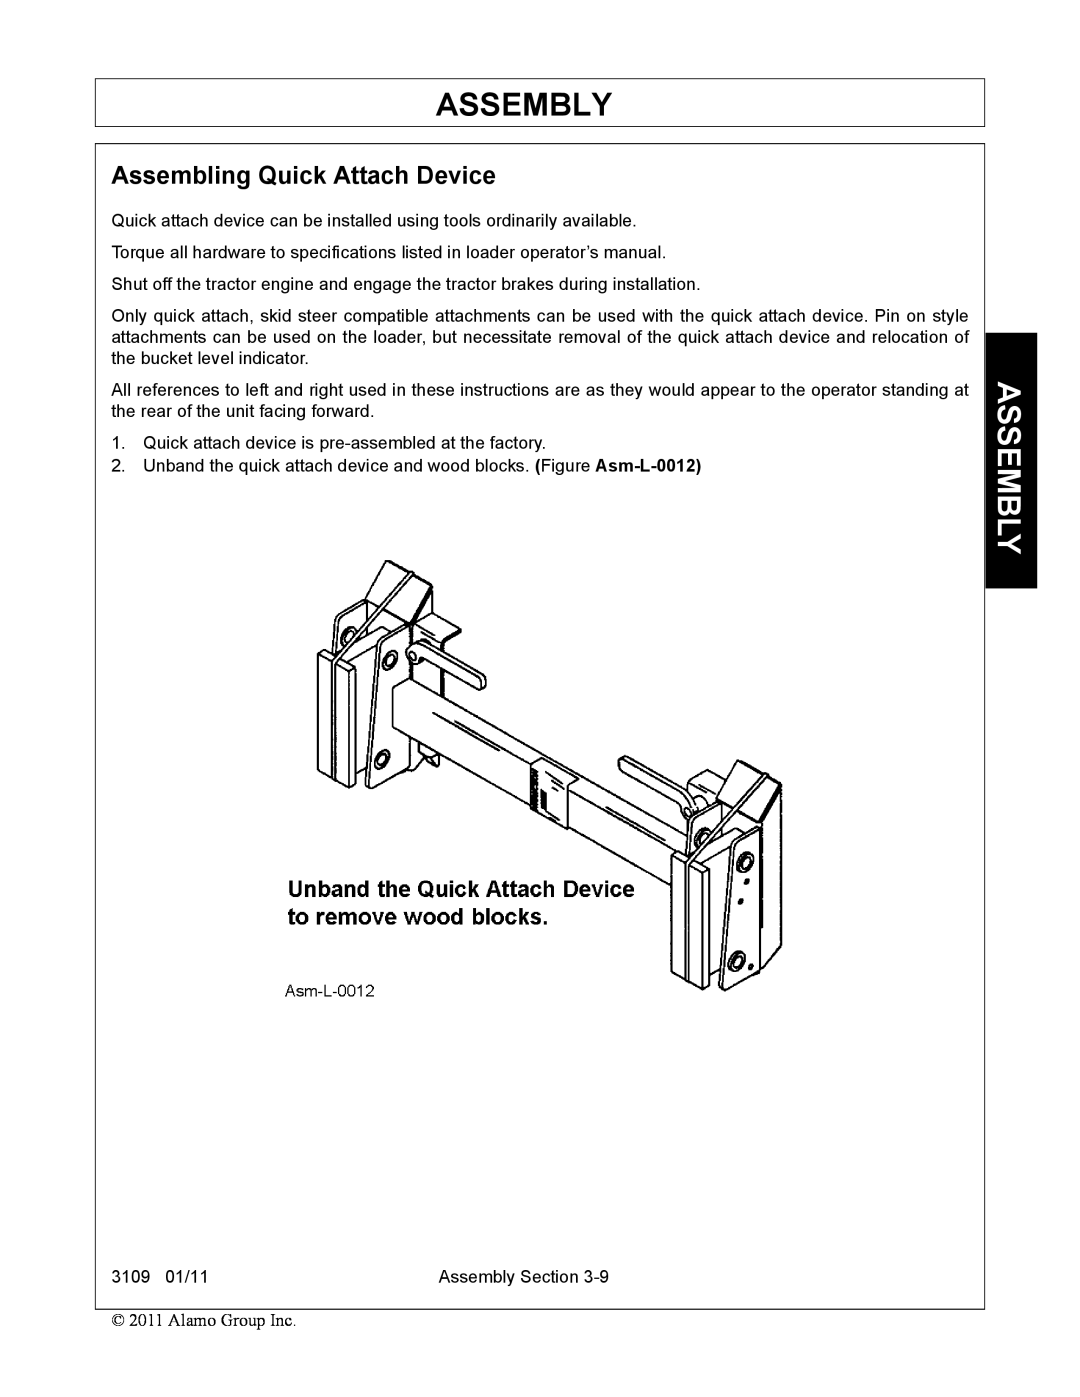 Alamo 3109 manual Assembly, Assembling Quick Attach Device 